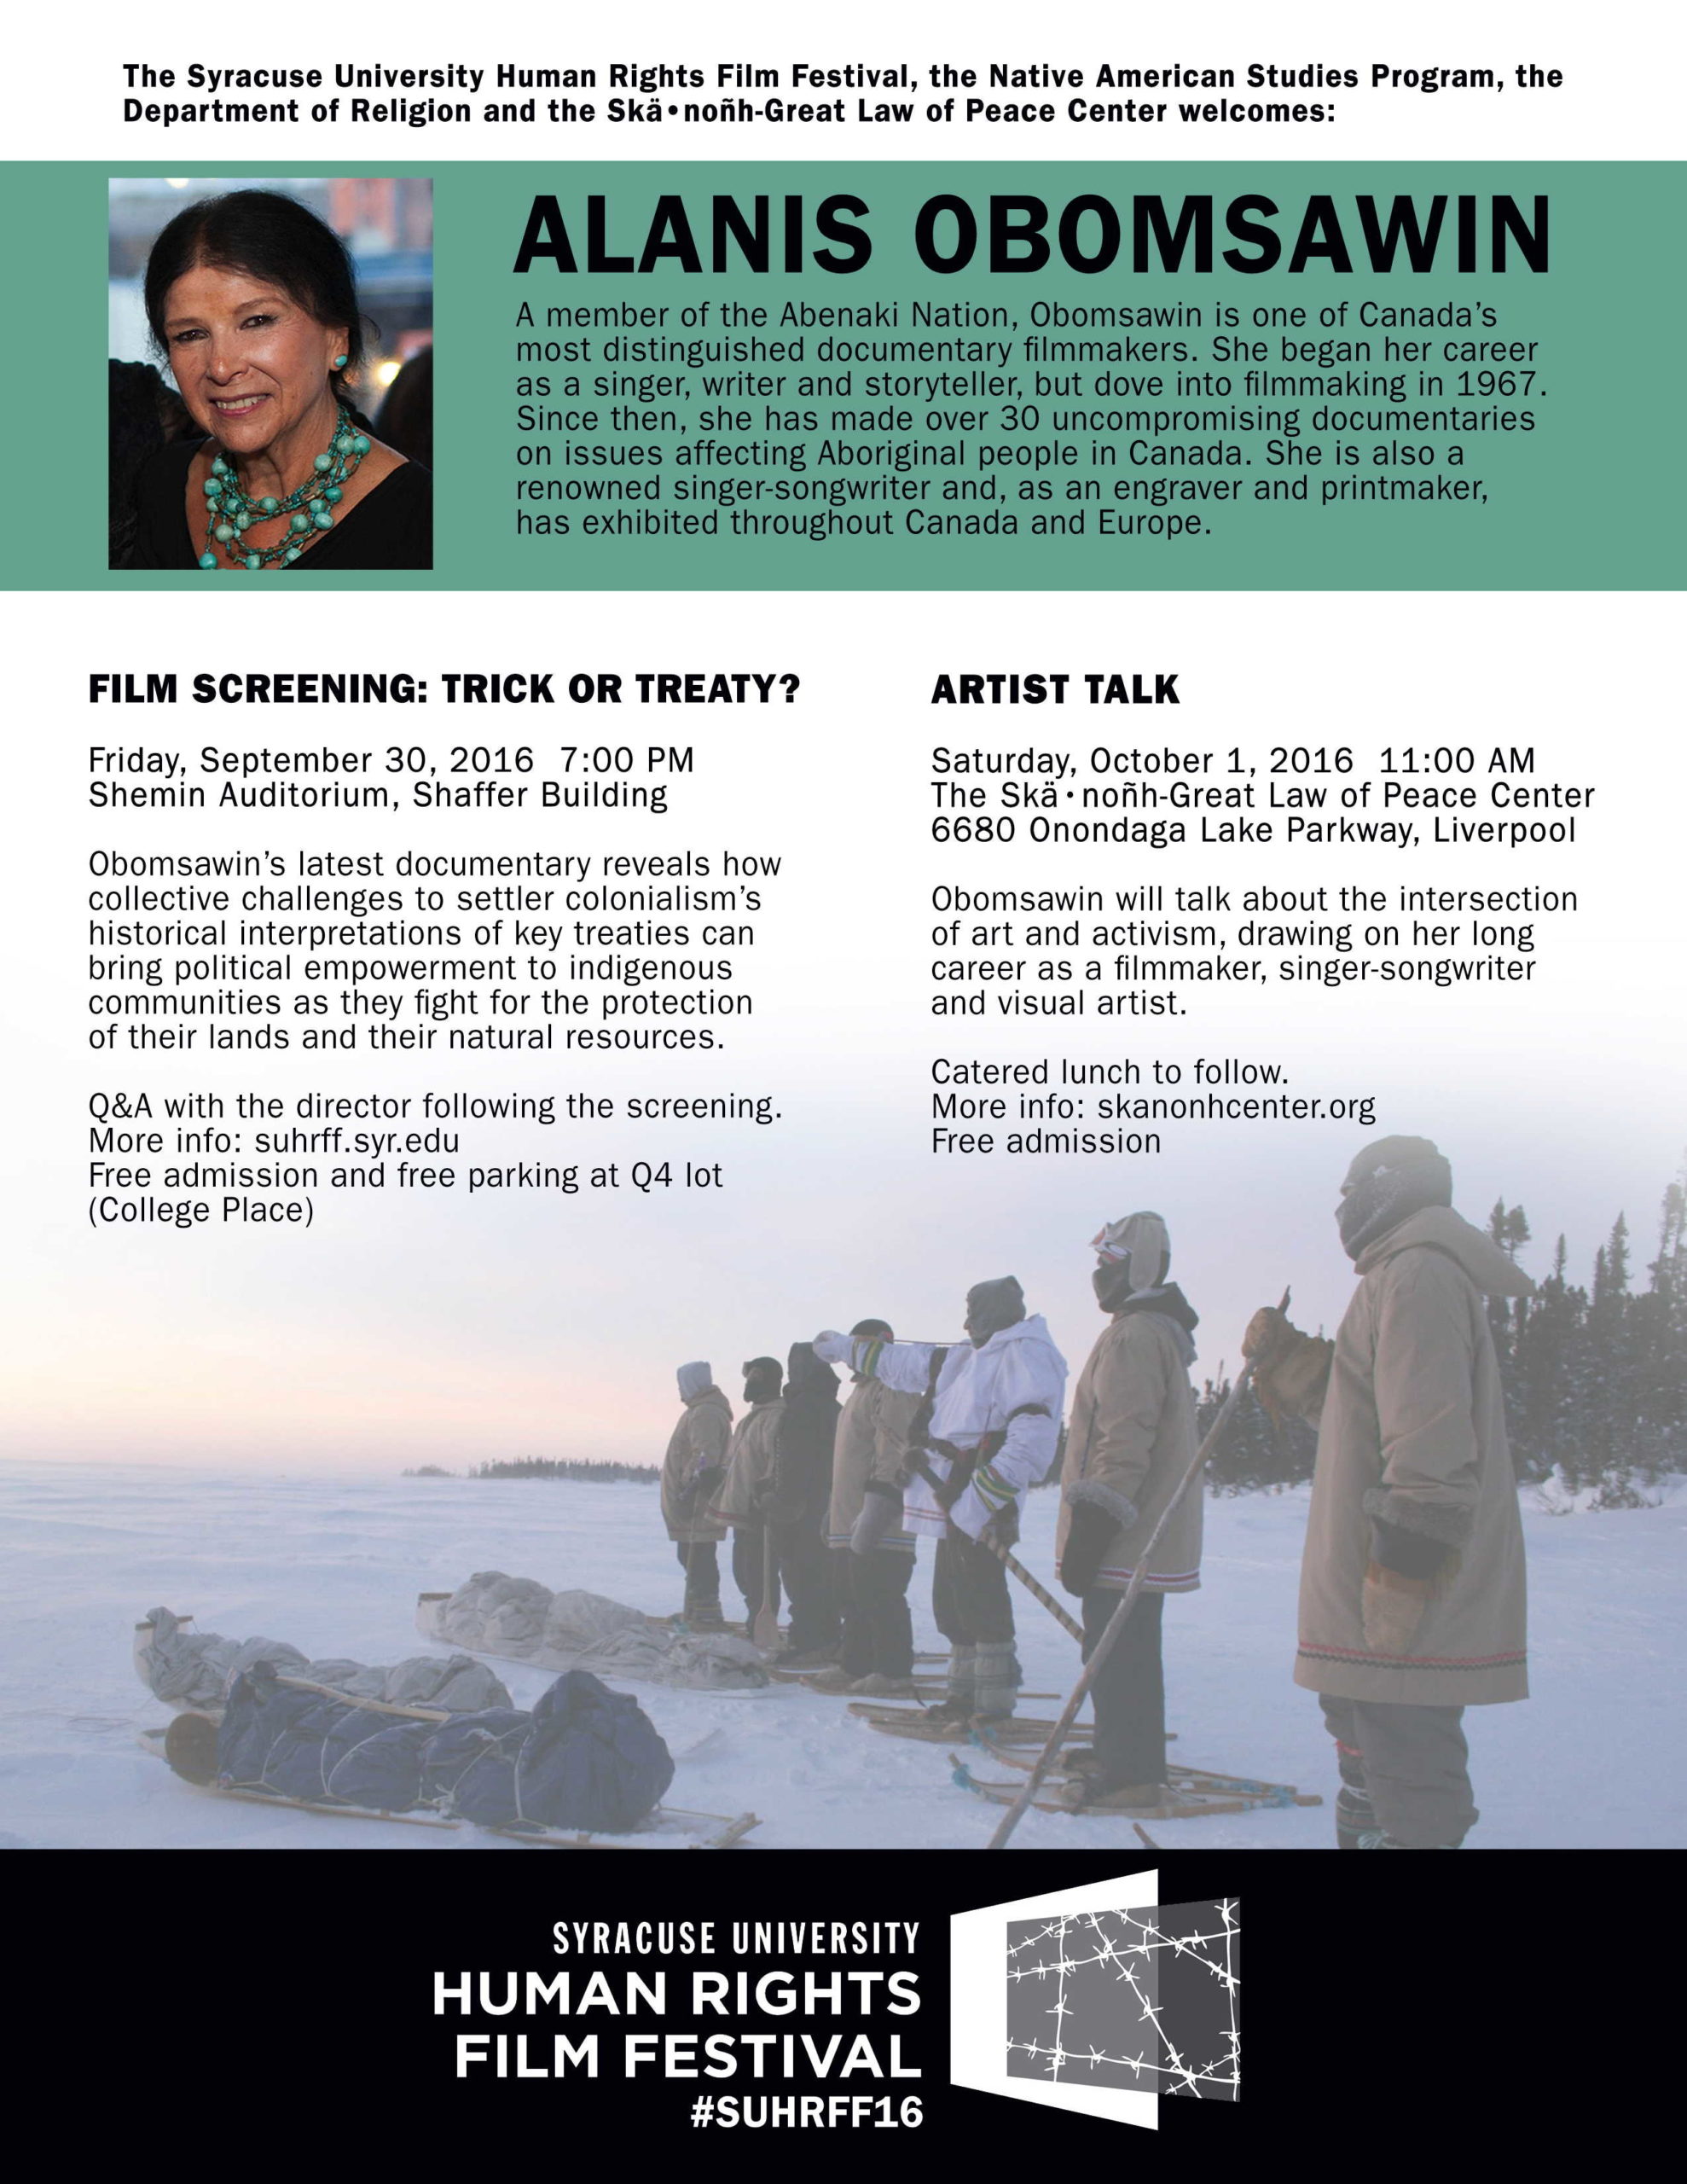 Artist Talk with Alanis Obomsawin